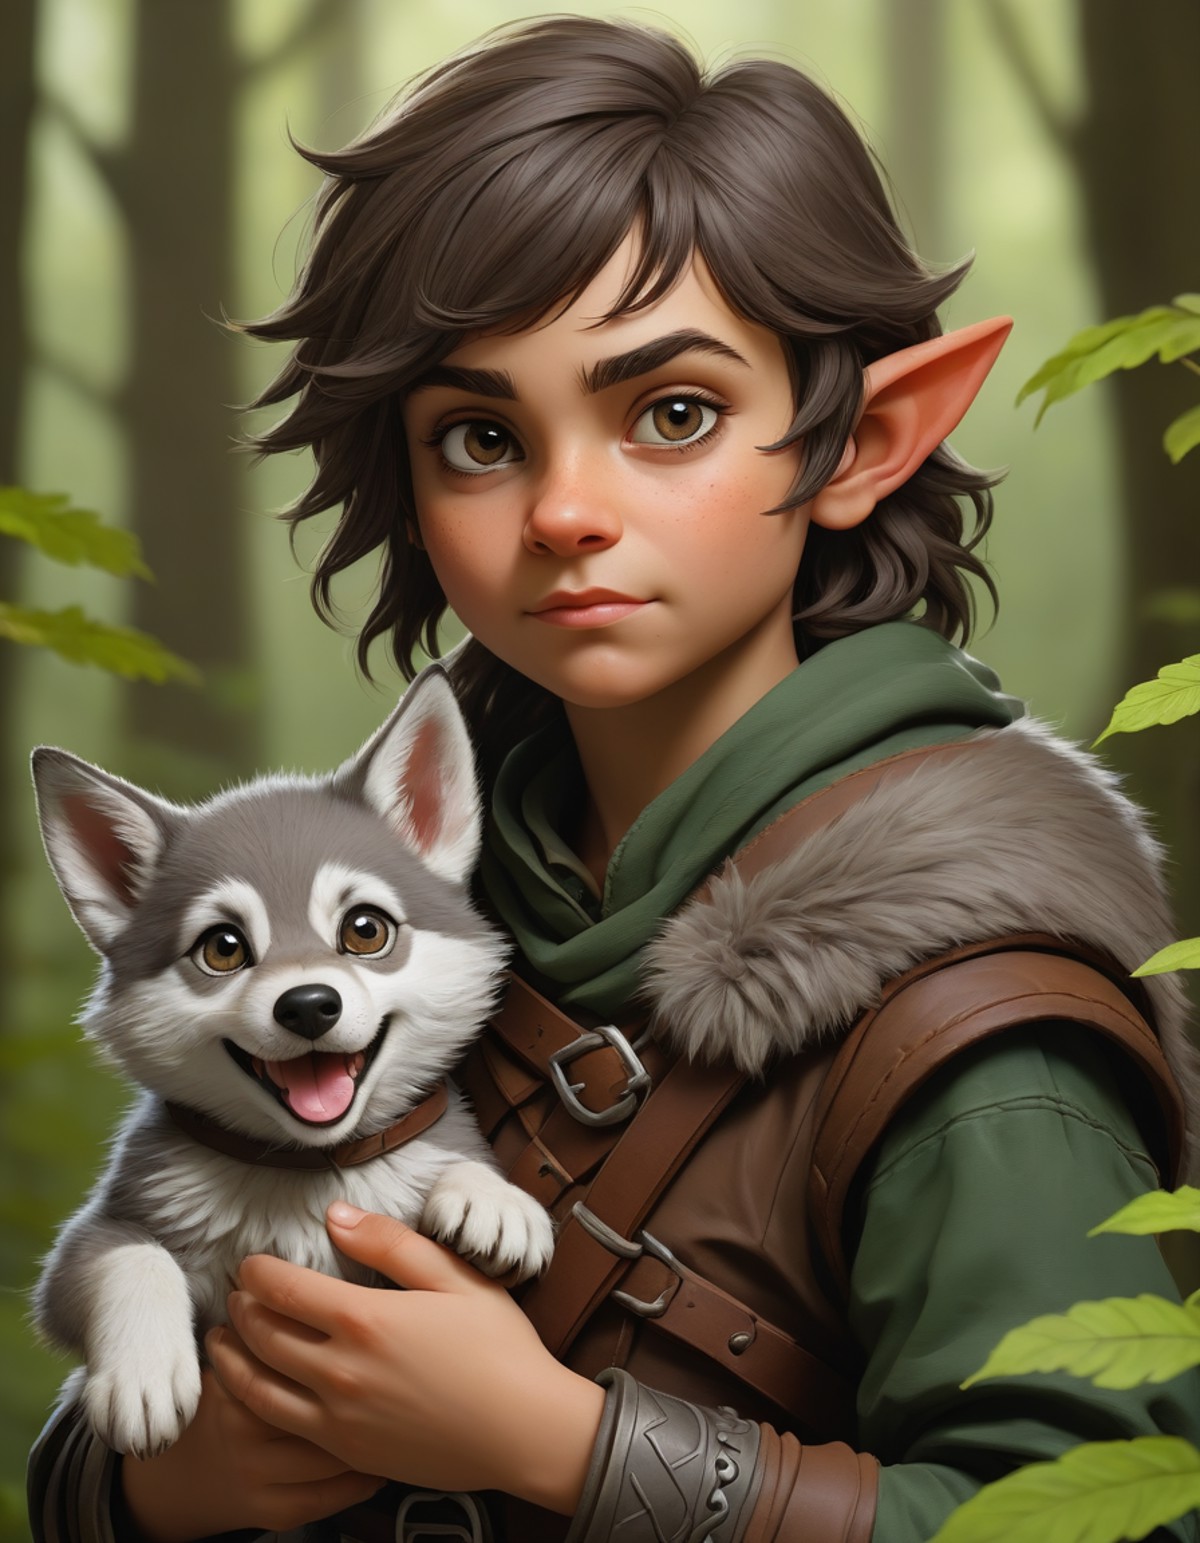 A fantasy portrait of a halfling rogue with a pet wolf cub, set against a forest backdrop, in the style of Erol Otus